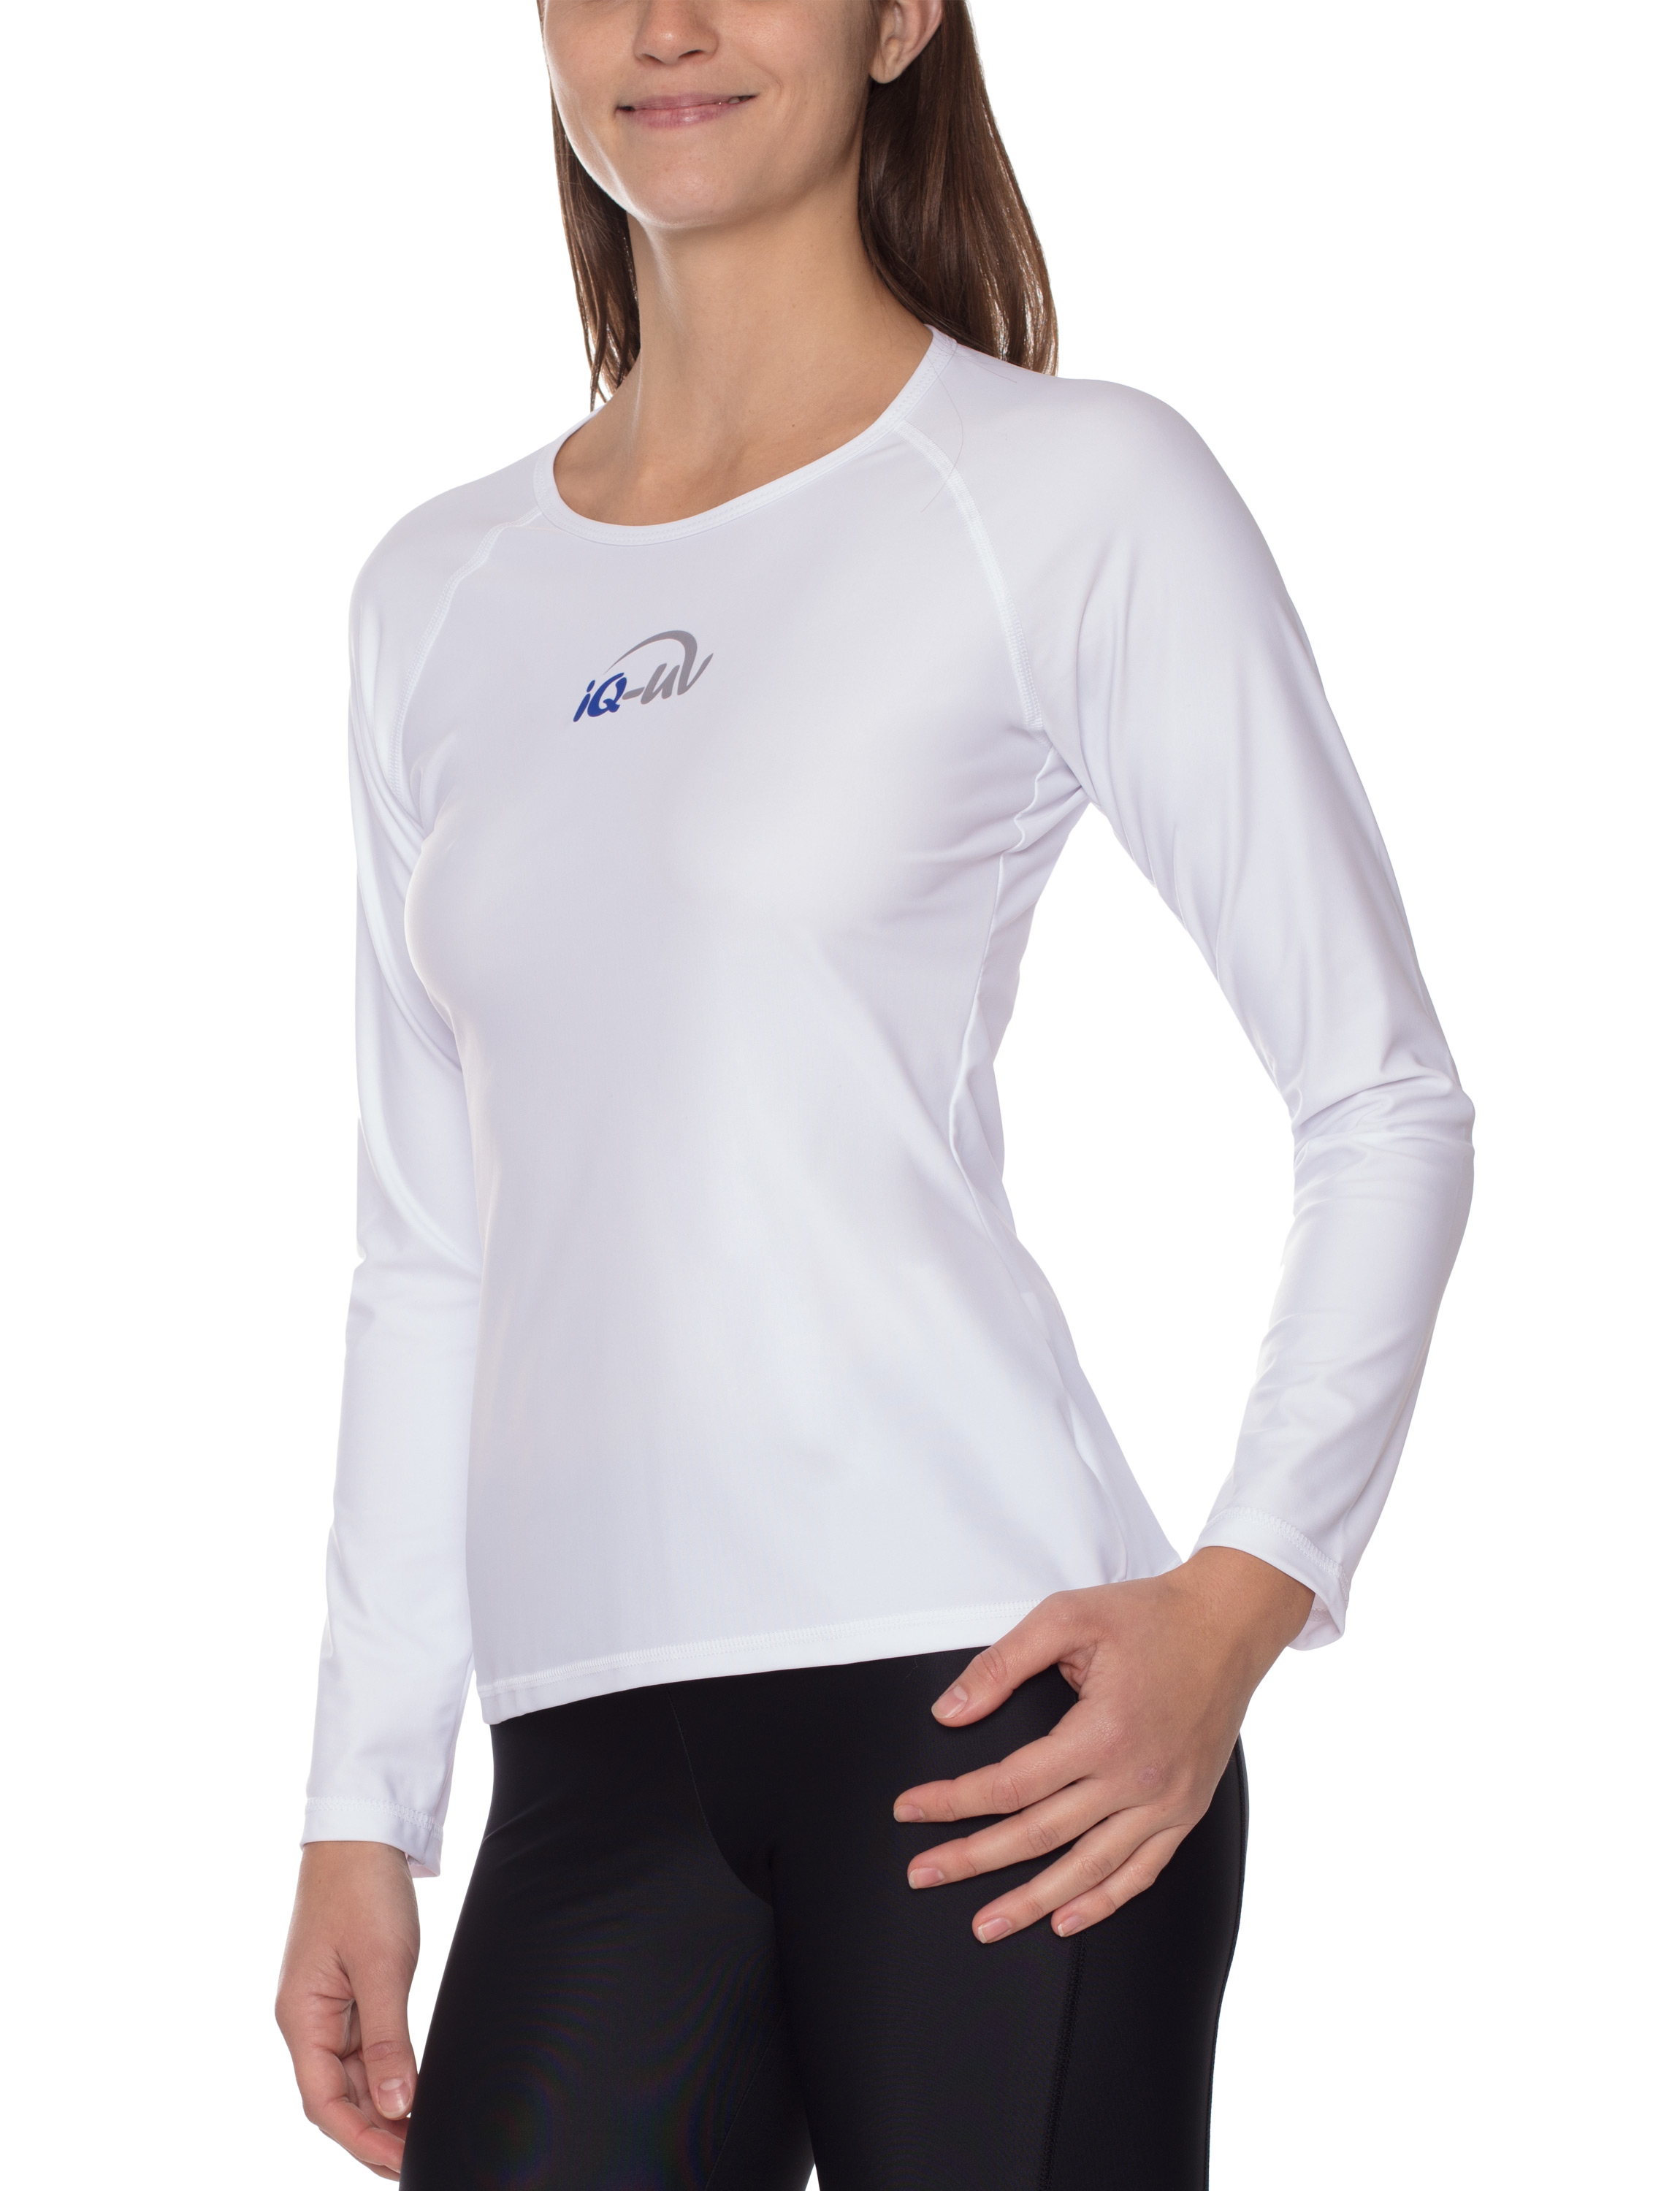  Long Sleeve UV Shirt Women's Loose Fit for Beach and Sea